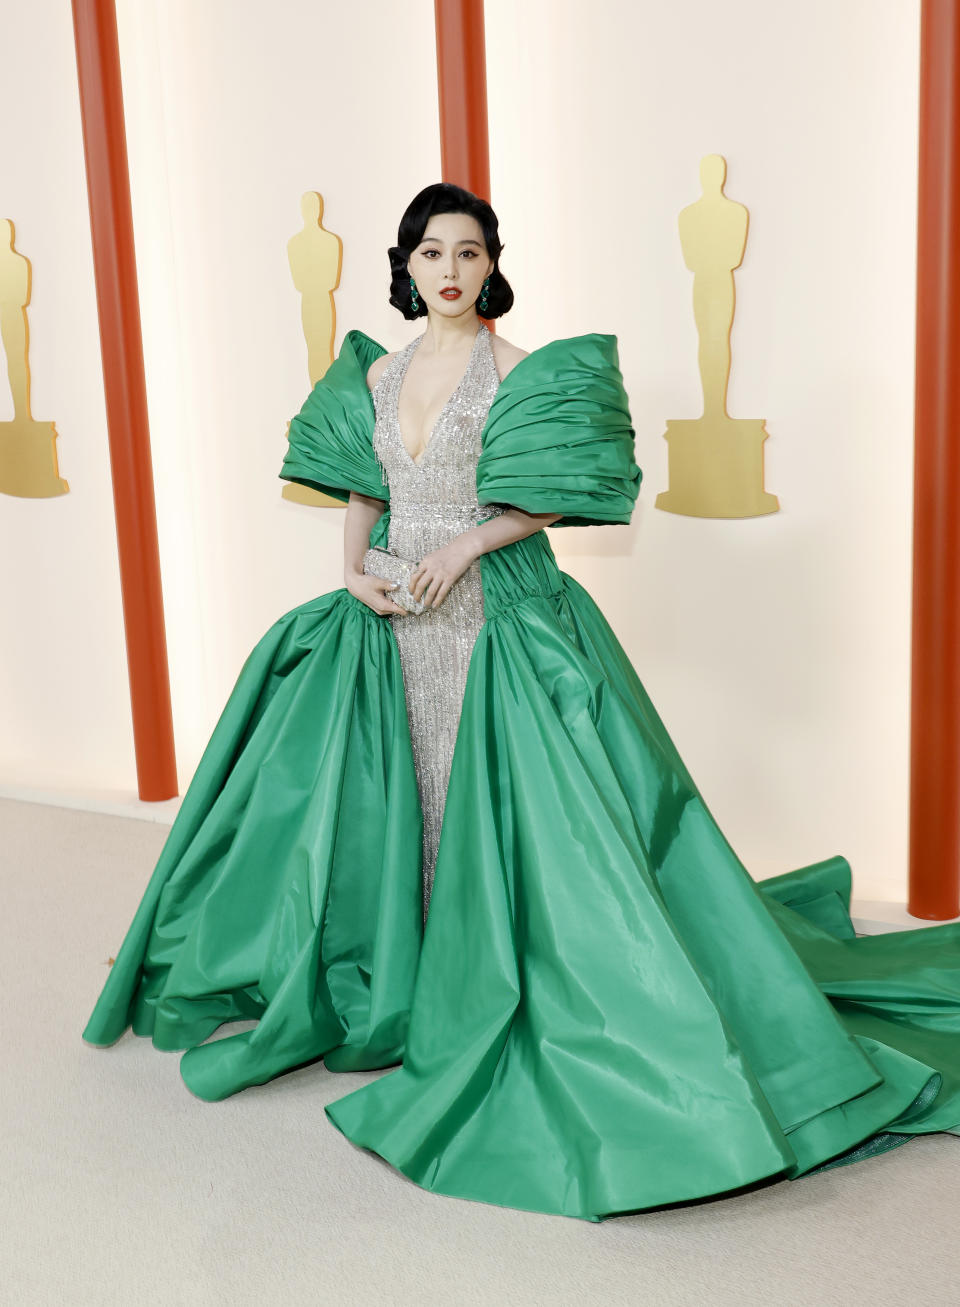 Fan Bingbing looked incredible at the 95th Academy Awards. (Photo by Mike Coppola/Getty Images)